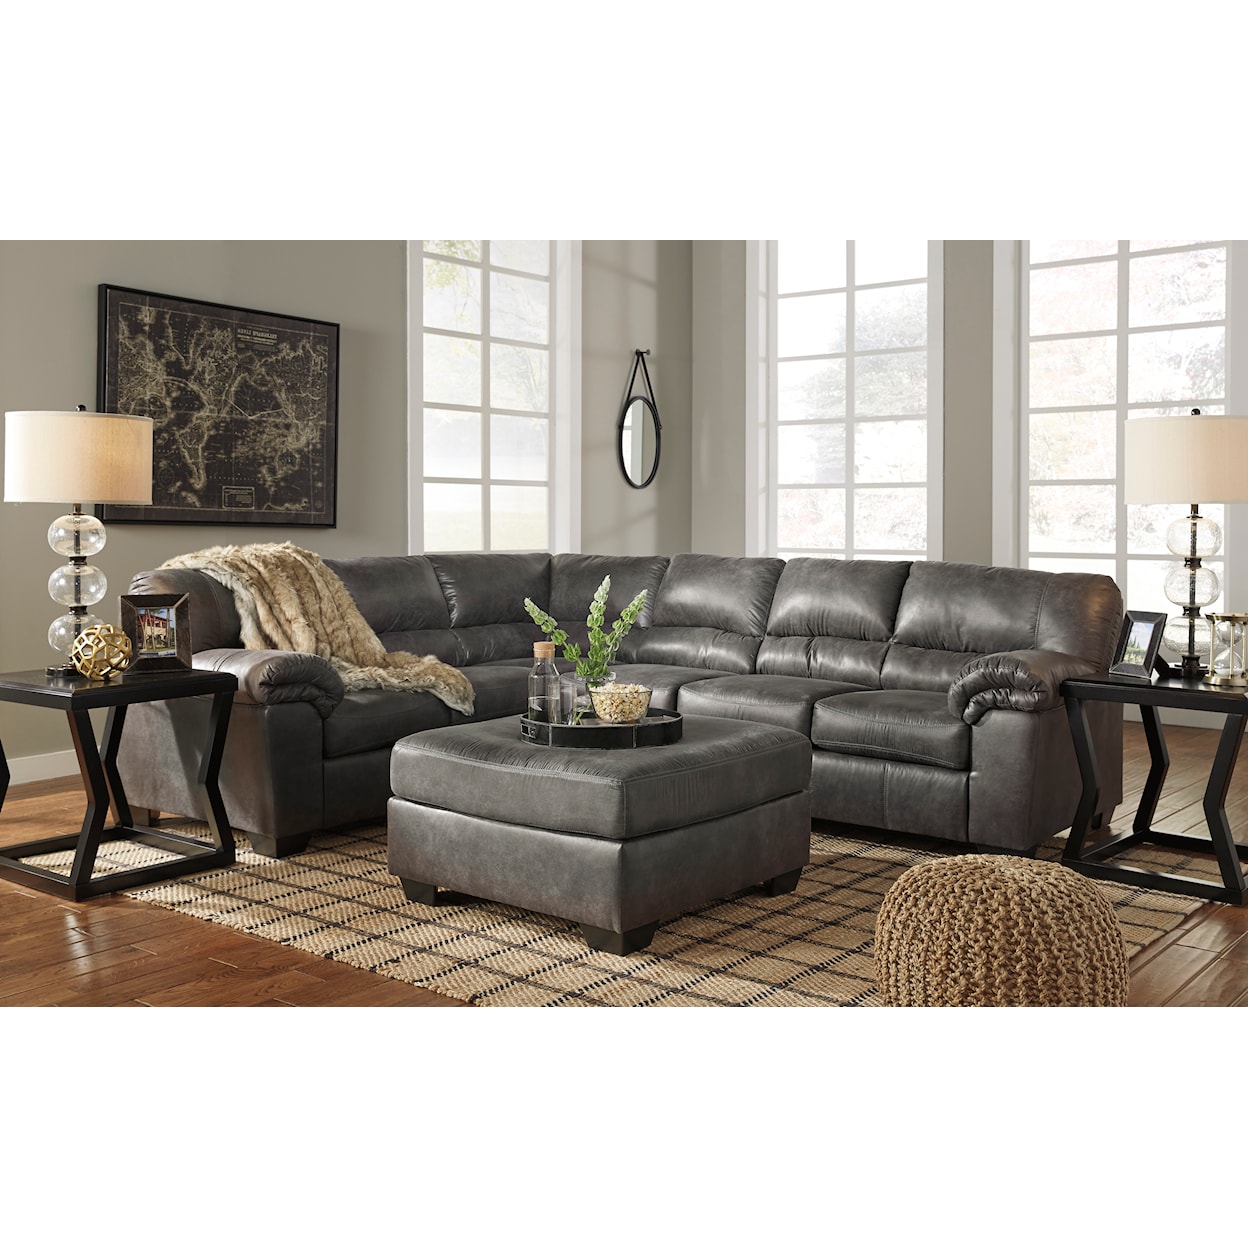 Ashley Furniture Signature Design Bladen 3-Piece Sectional with Ottoman